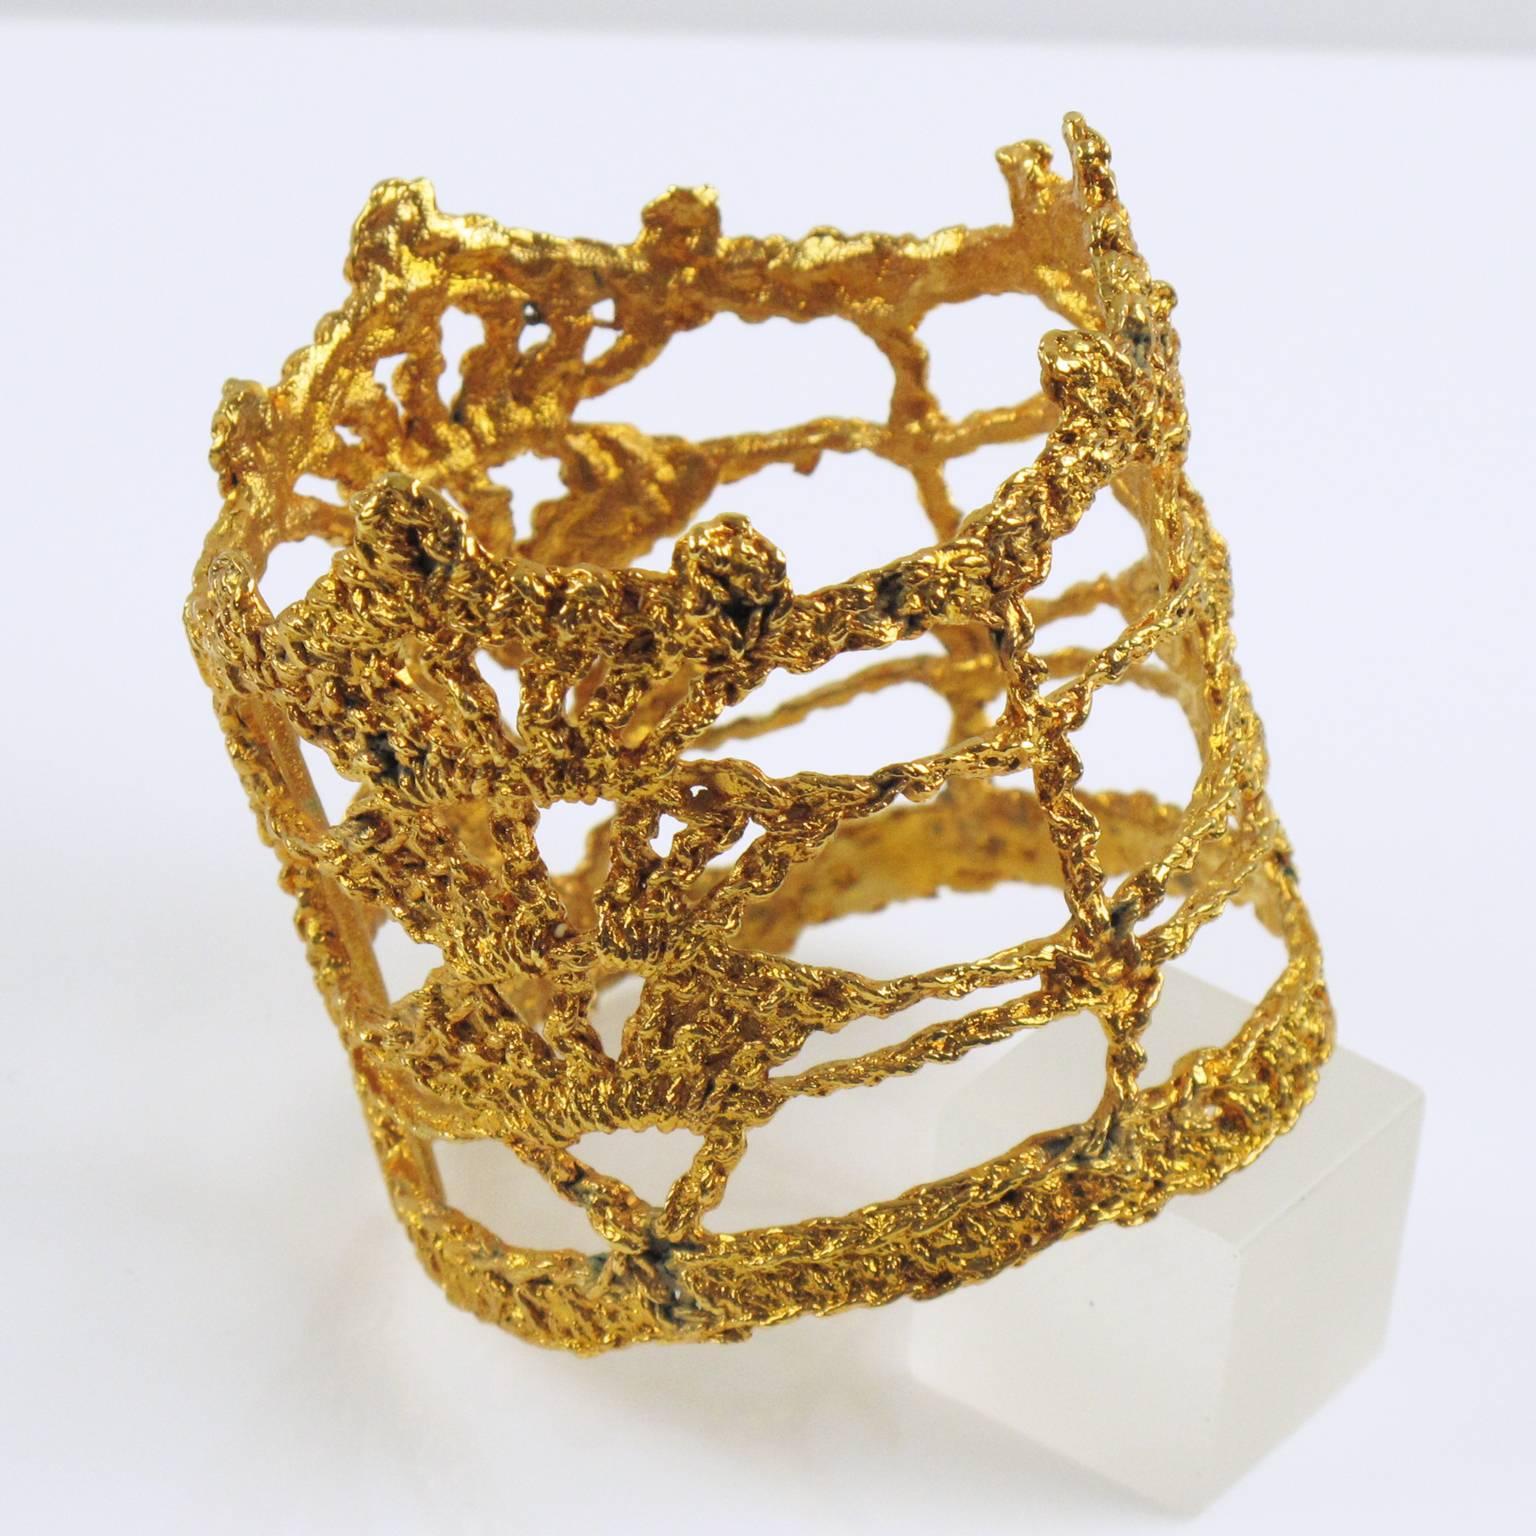 Rare 1990s Christian Lacroix Paris signed bangle bracelet. Unusual oversized wide bracelet with knitting design in gold plate finish. This is real knitting dipped into gold plating bath. Spectacular shape. Signed in the inside with Lacroix ovoid